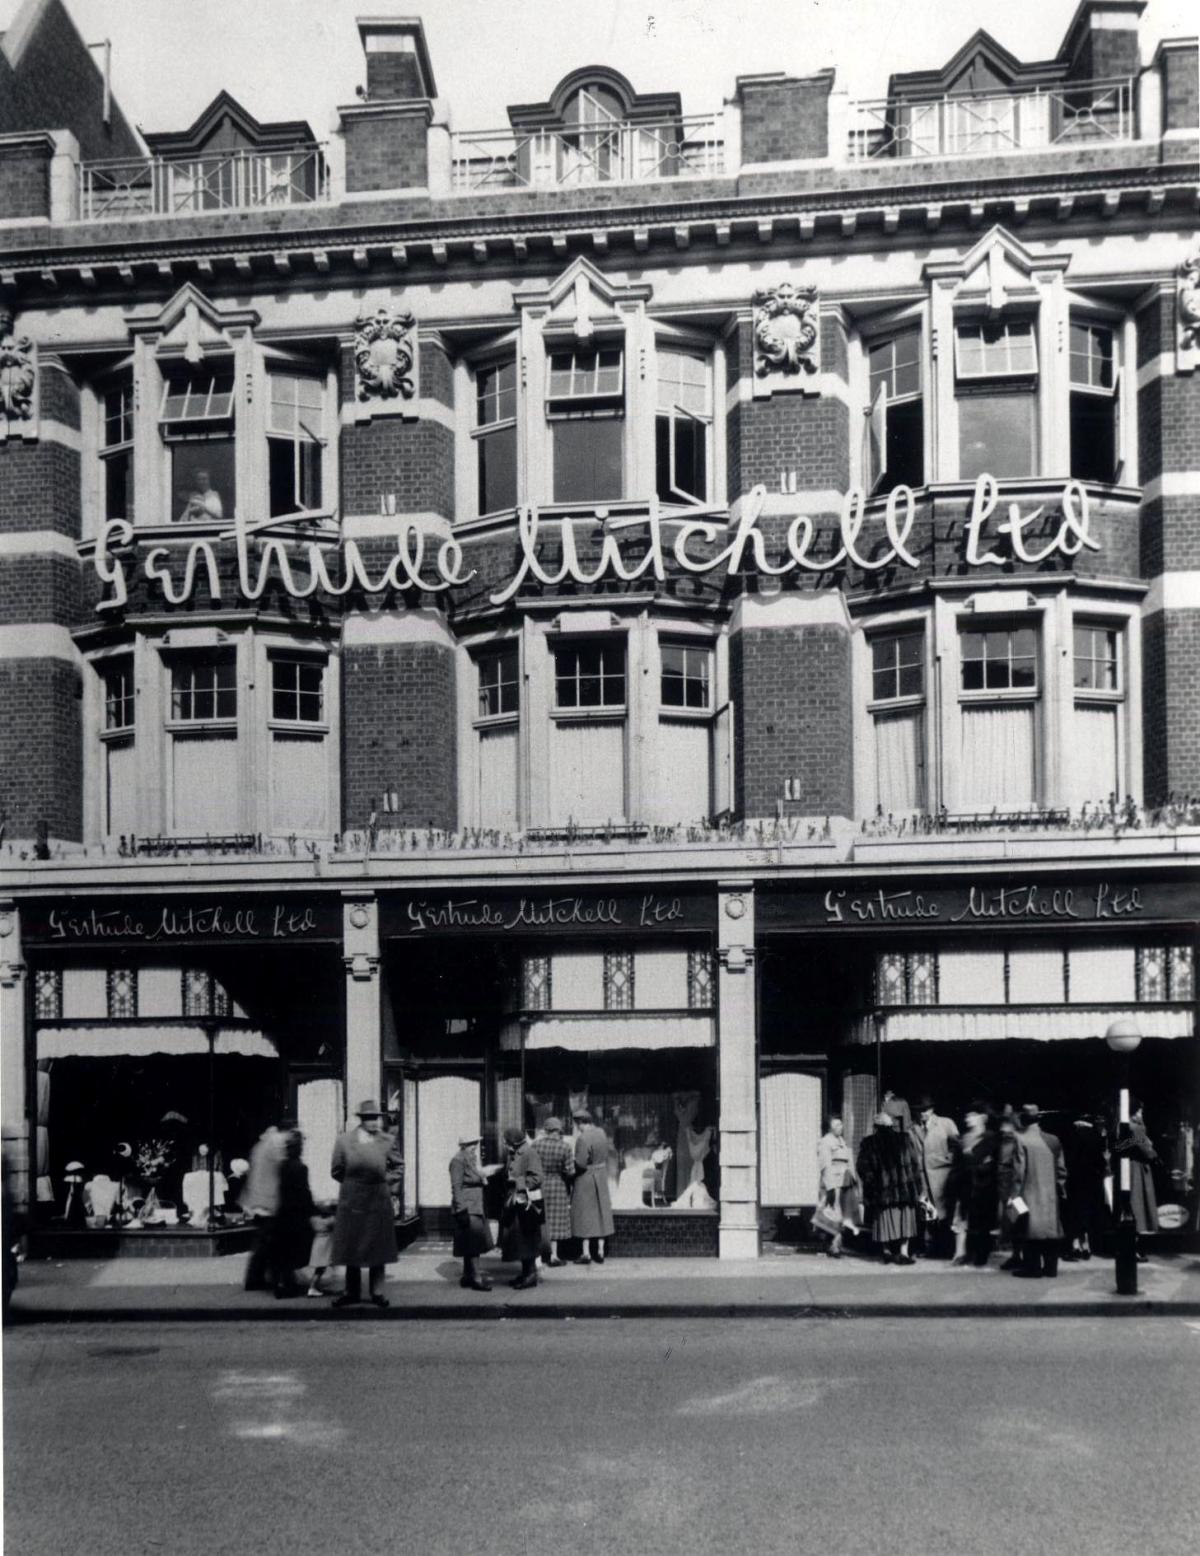 STYLISH: The long-established former fashion department store of Gertrude Mitchell Limited, which for decades stood next to Woolworth’s in the High St